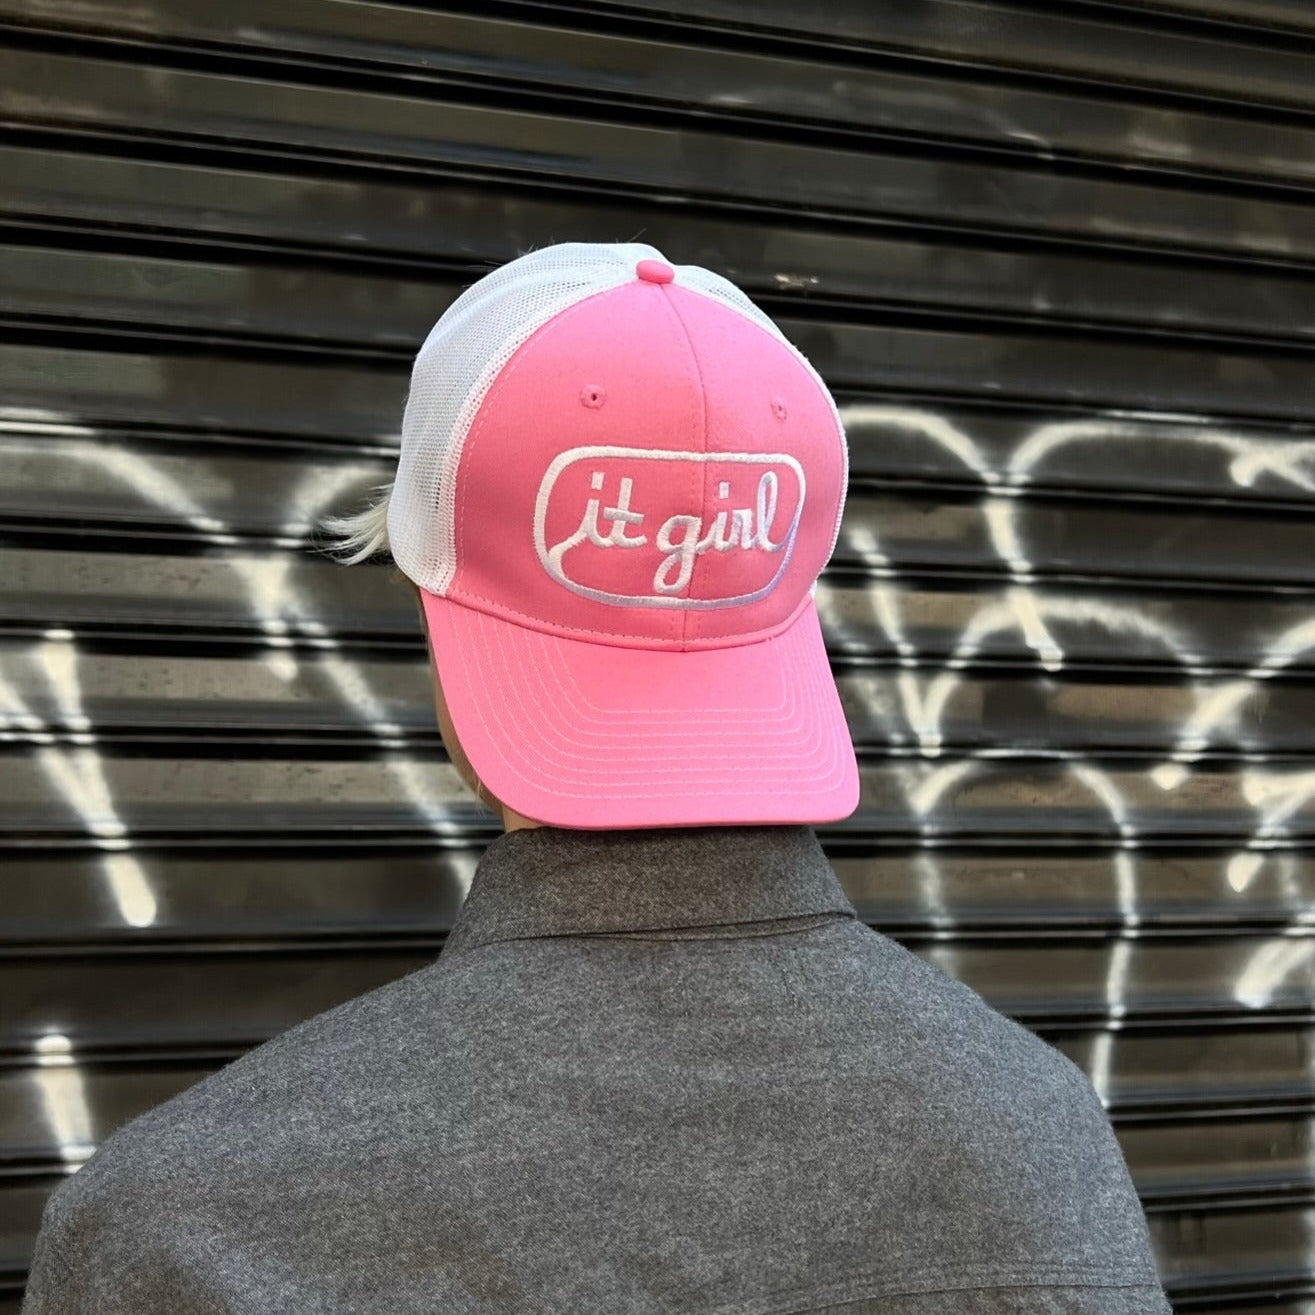 model facing away wearing pink and white trucker hat with white embroidery reading it girl in cursive